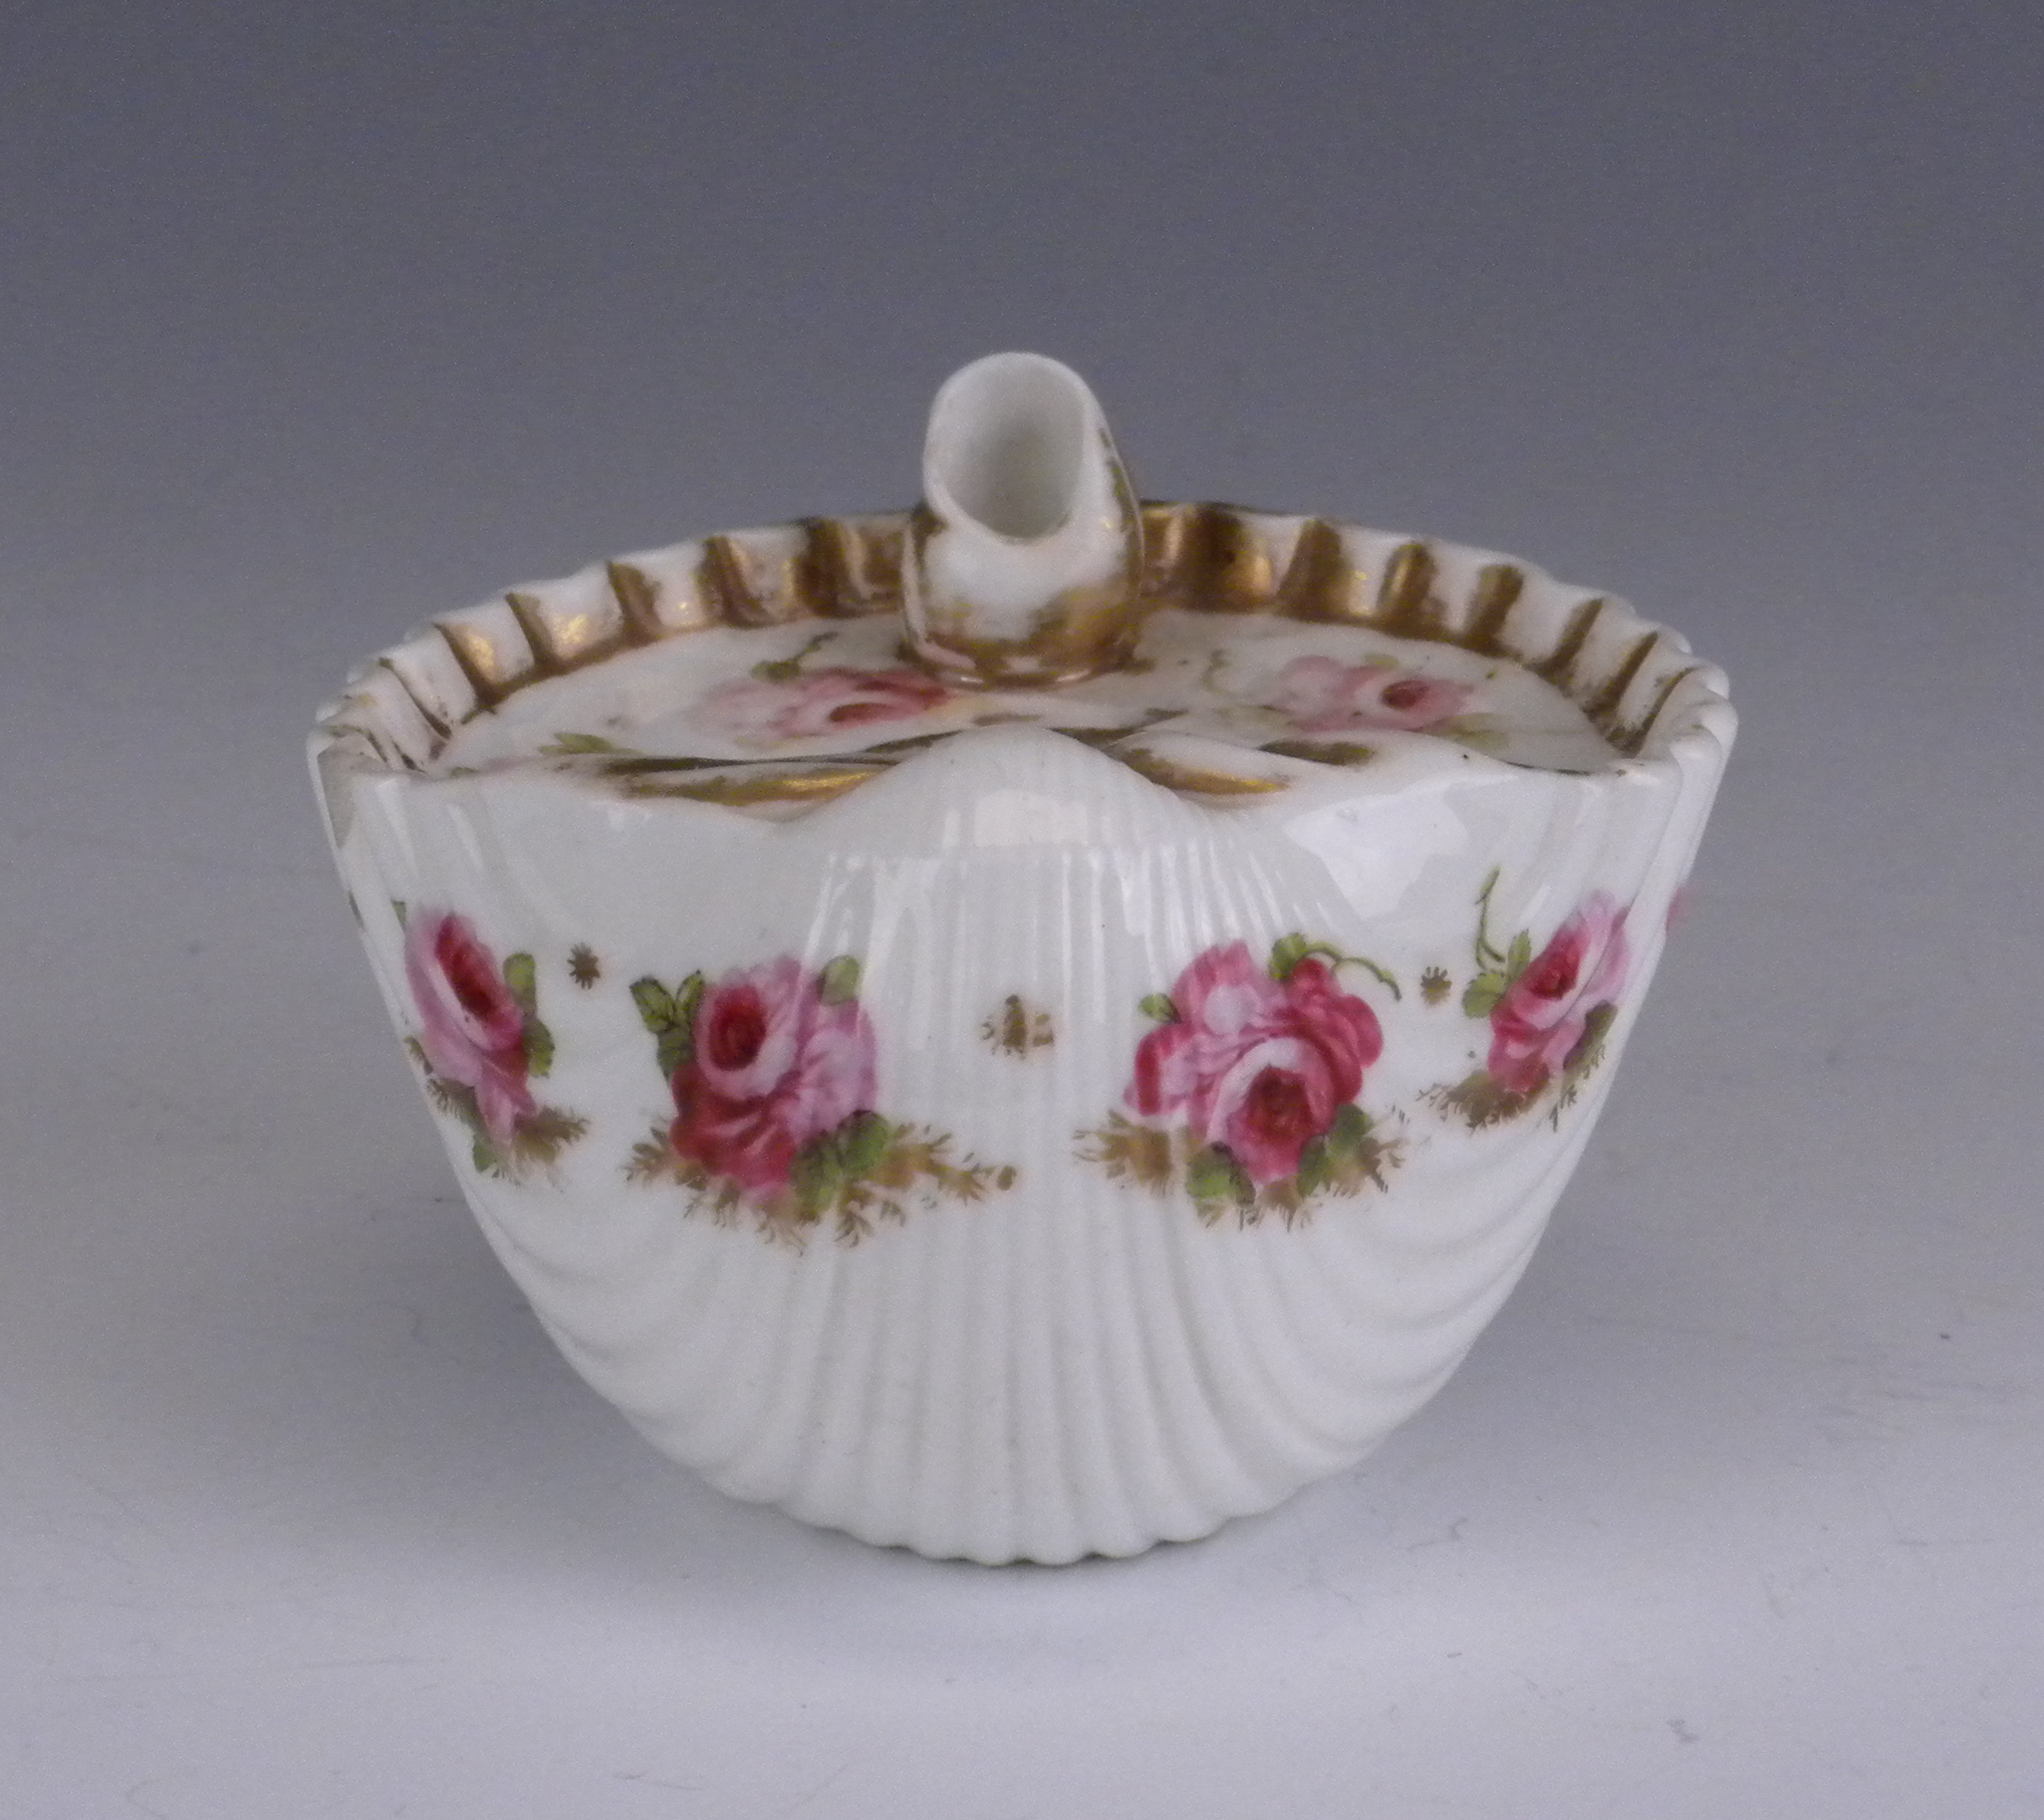 A Swansea porcelain shell Inkwell, circa 1815-1818, locally painted with rose sprigs on gilt seaweed - Image 2 of 2